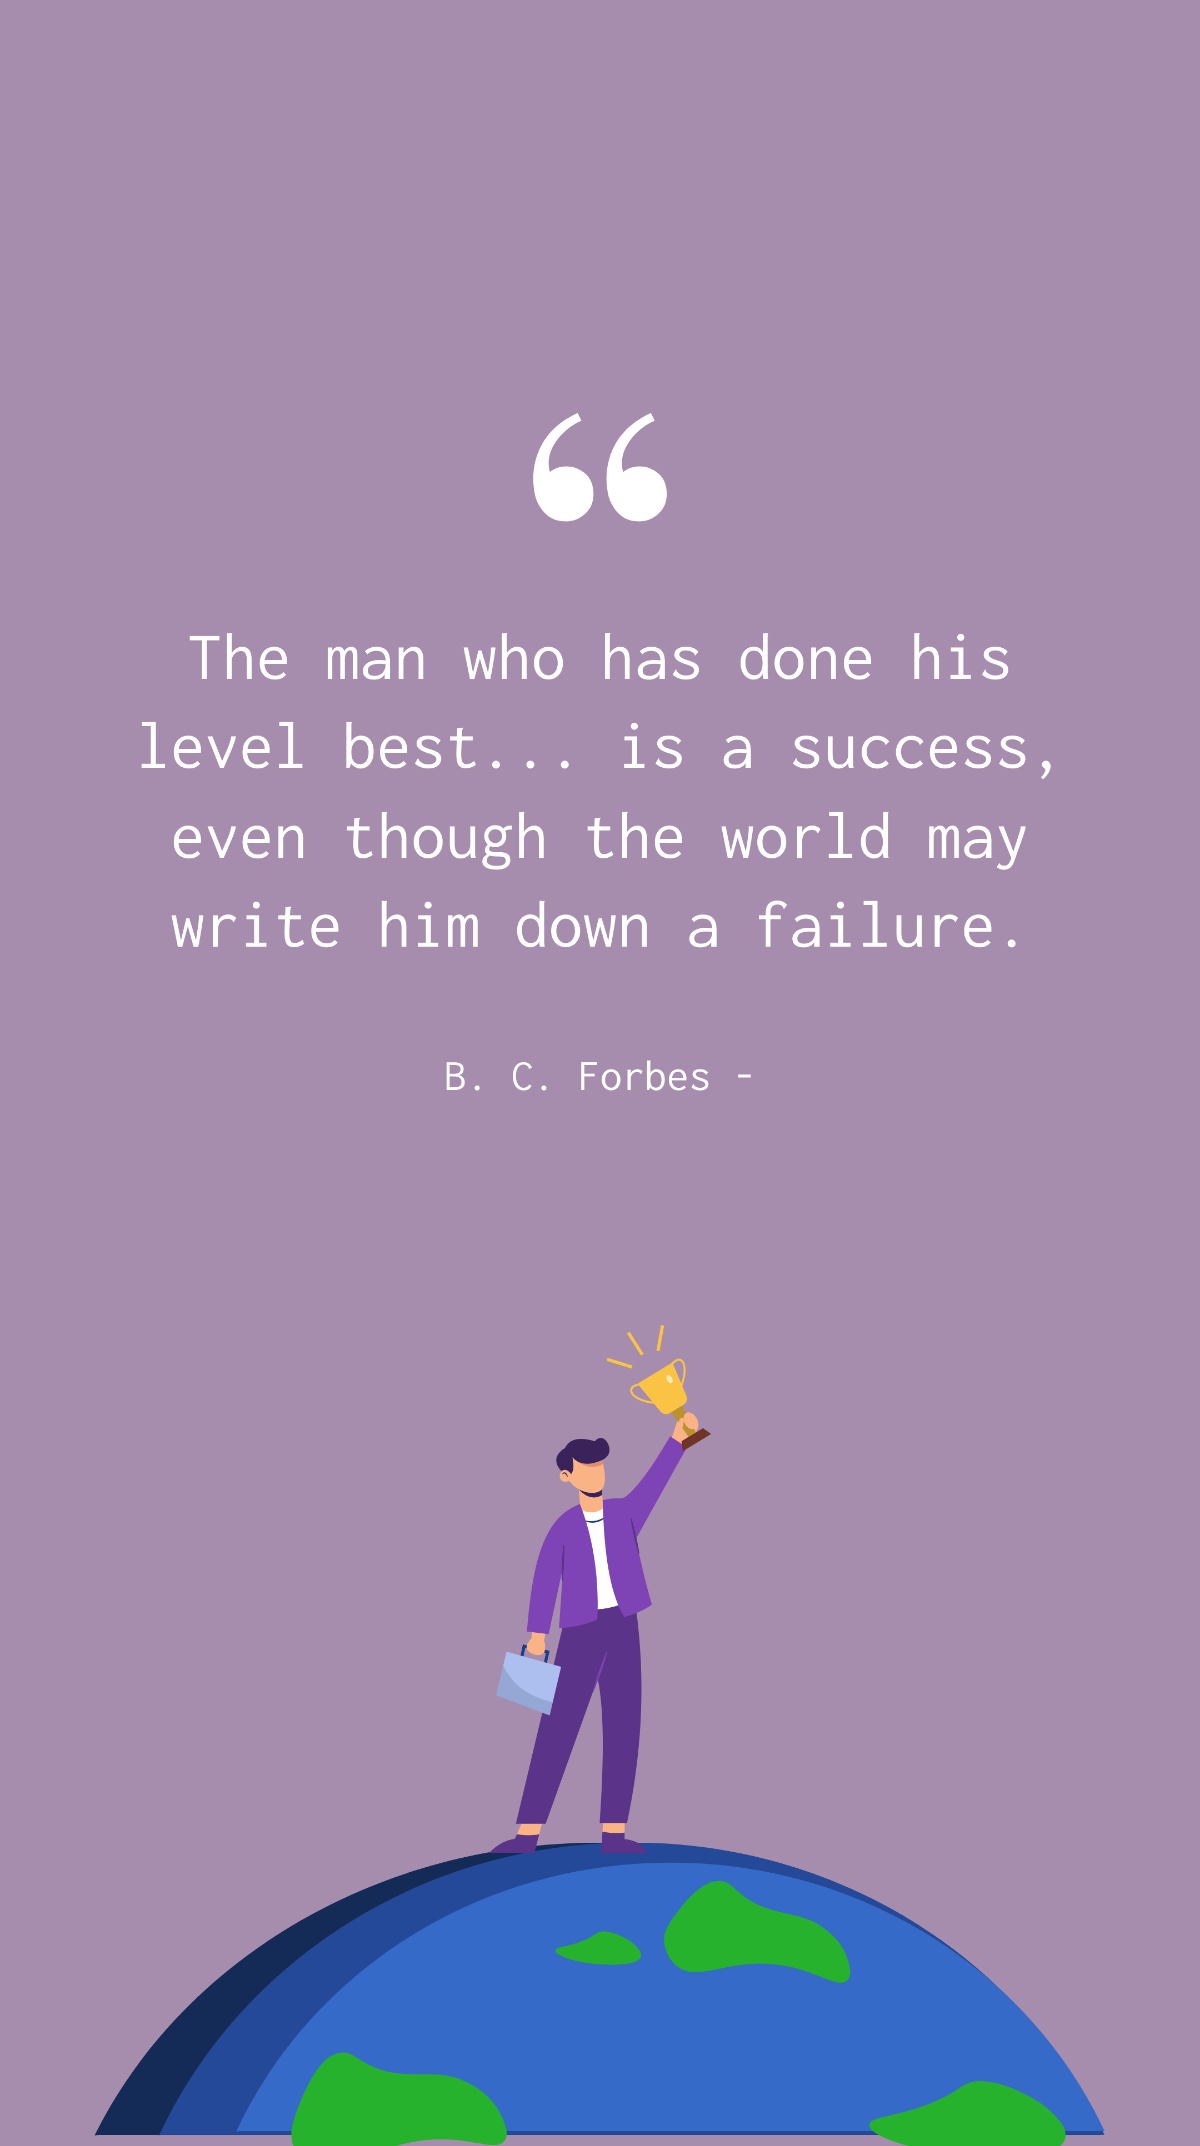 B. C. Forbes - The man who has done his level best... is a success, even though the world may write him down a failure.